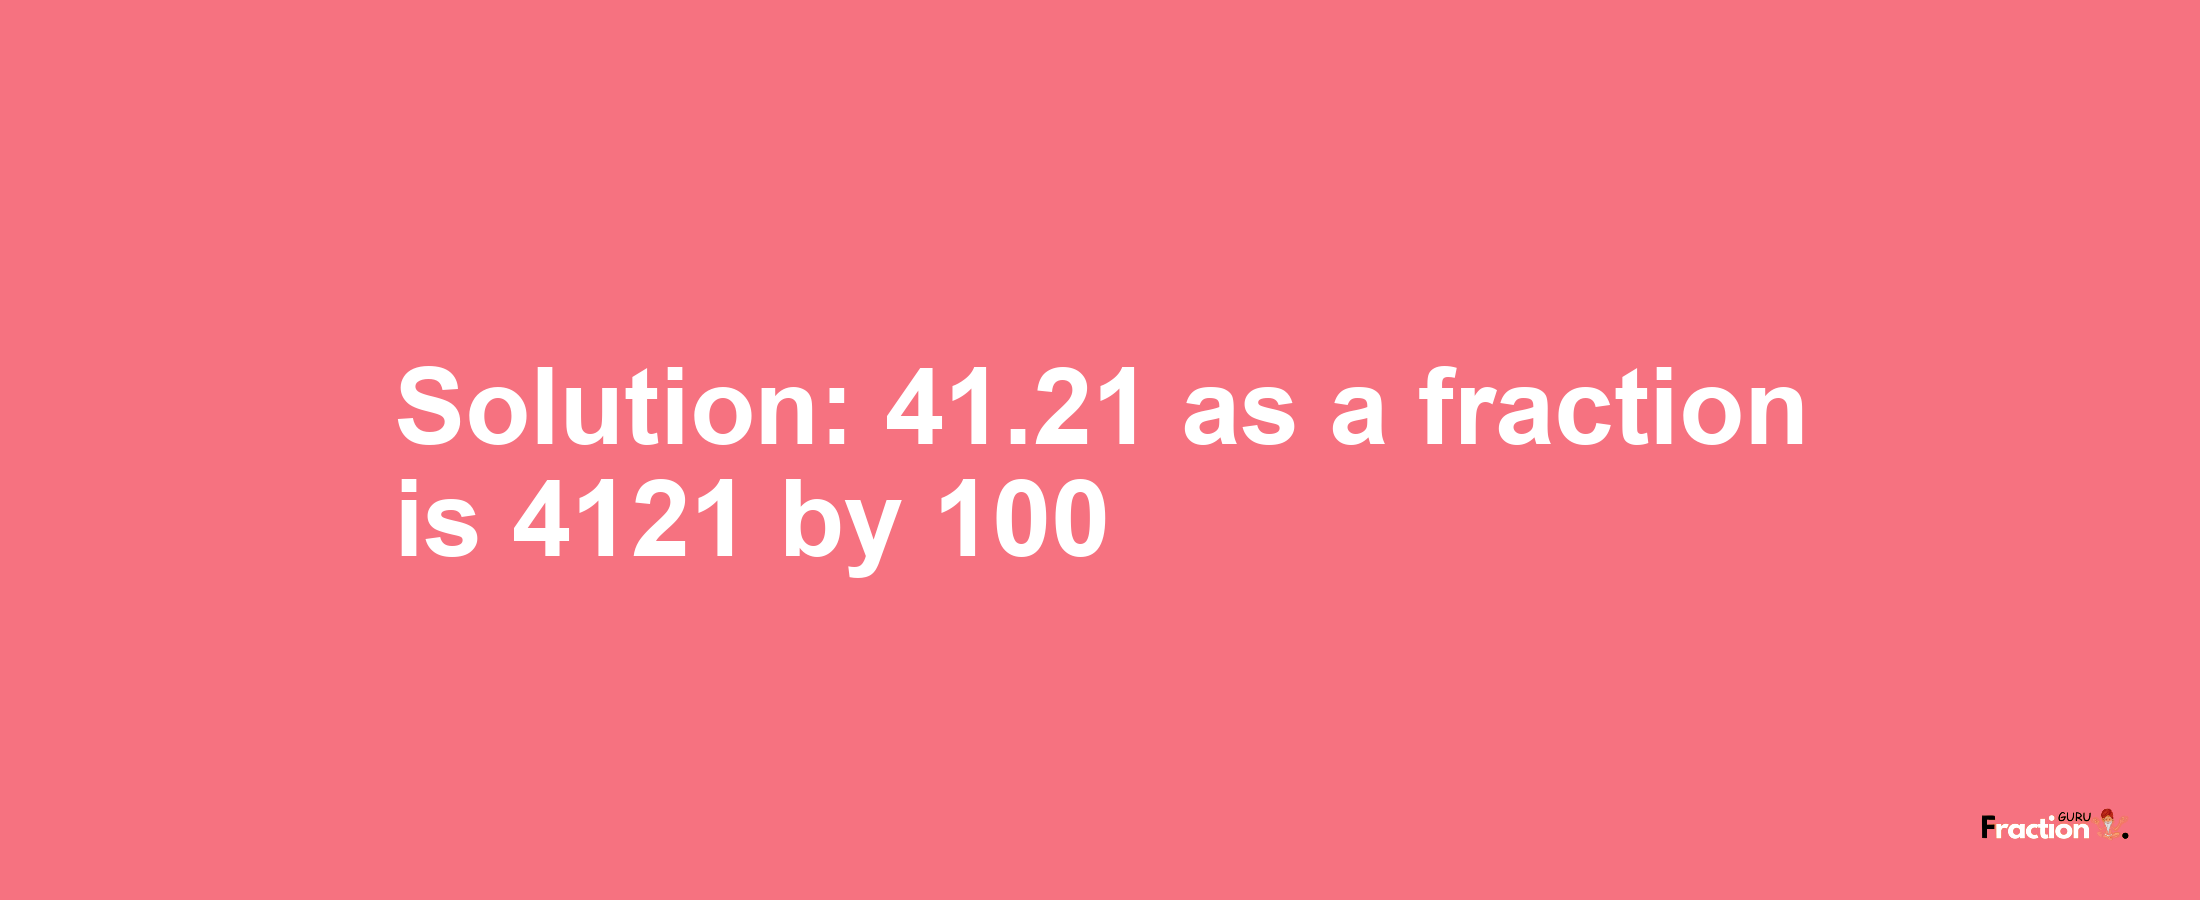 Solution:41.21 as a fraction is 4121/100